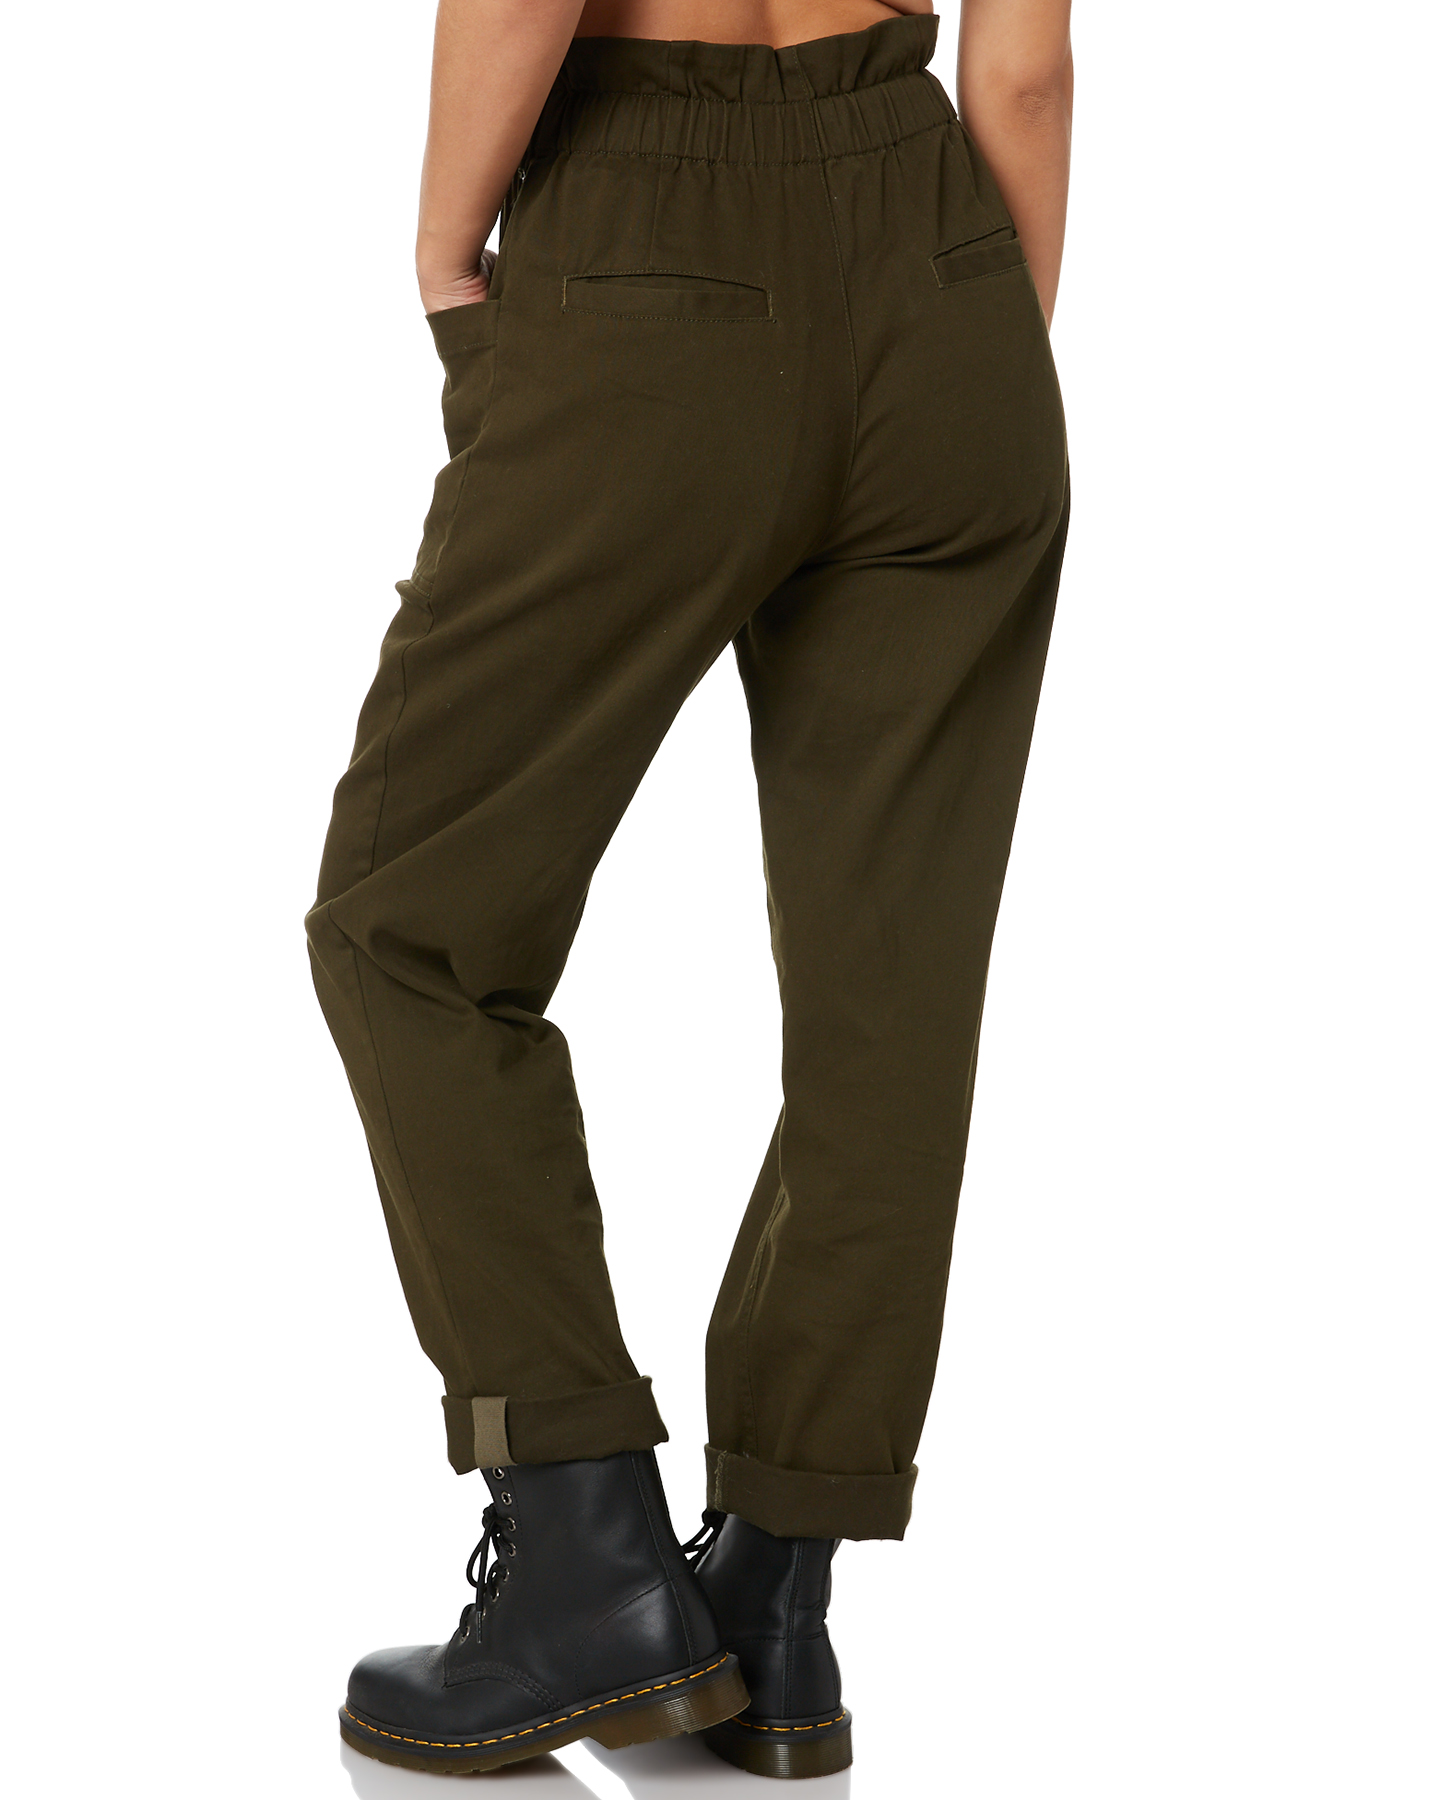 Rusty Colonel Pant - Dark Olive | SurfStitch